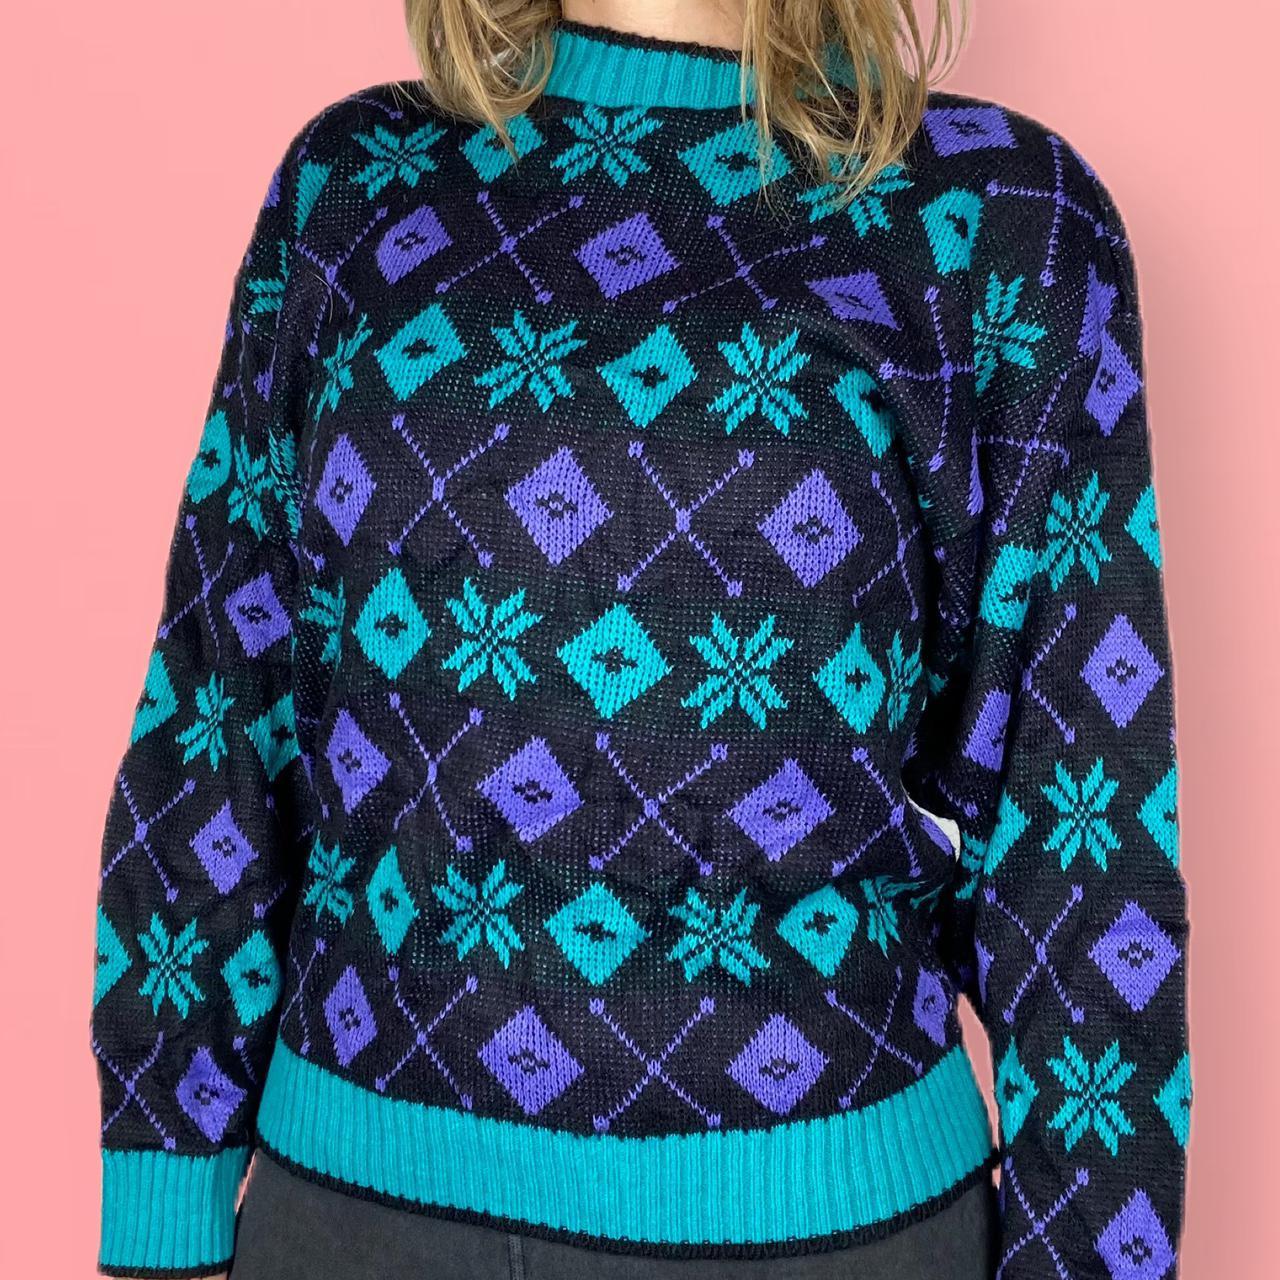 Product Image 2 - Vintage 80s crazy sweater by